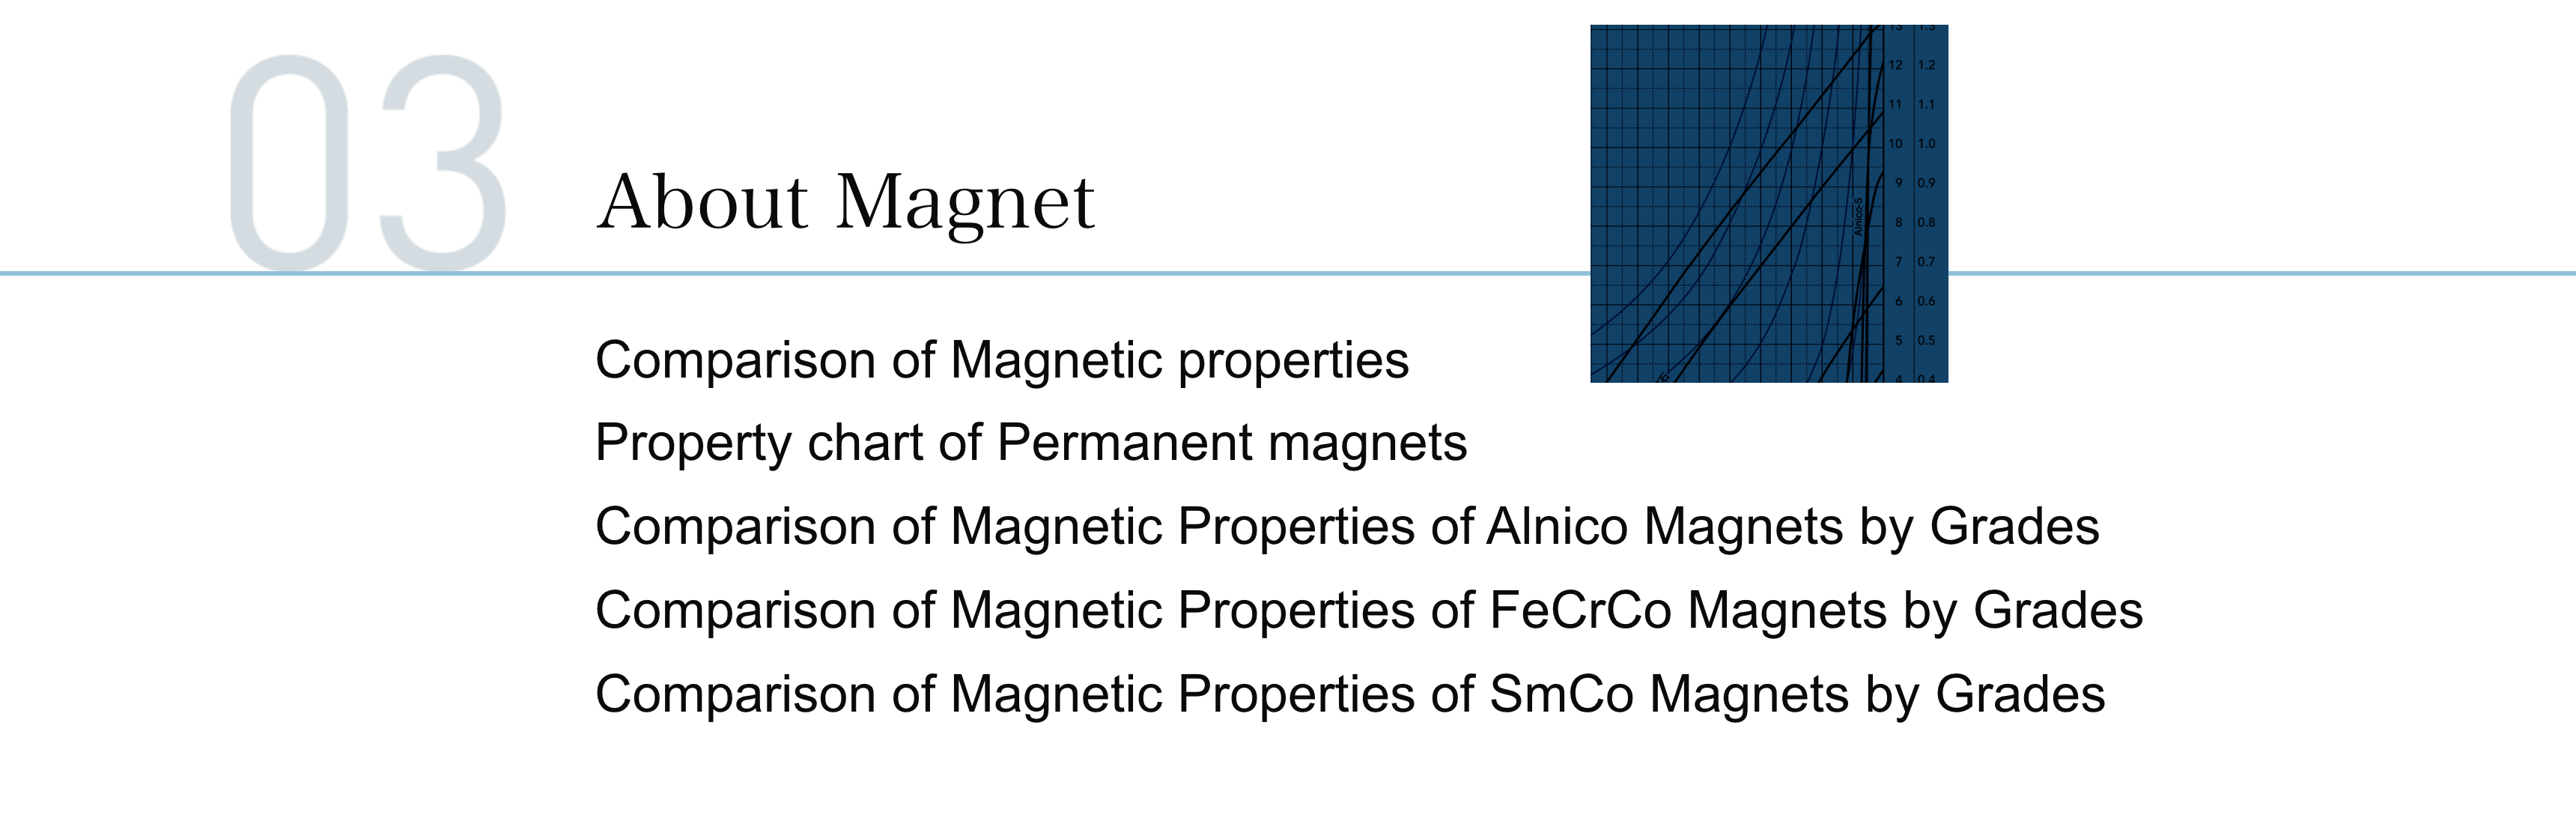 About Magnet